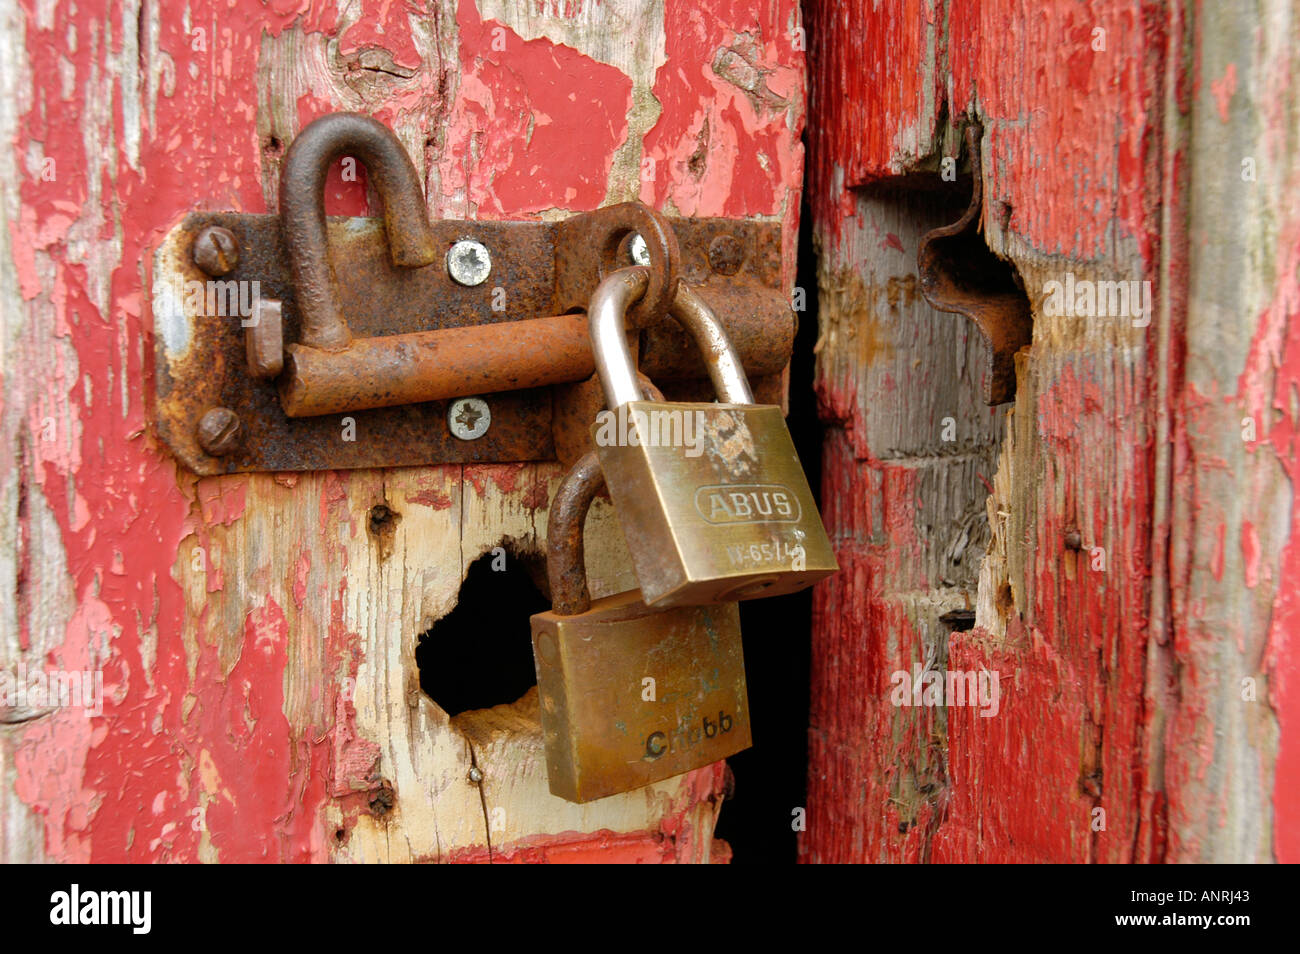 padlock and hasp and staple to secure red painted shed door Stock Photo